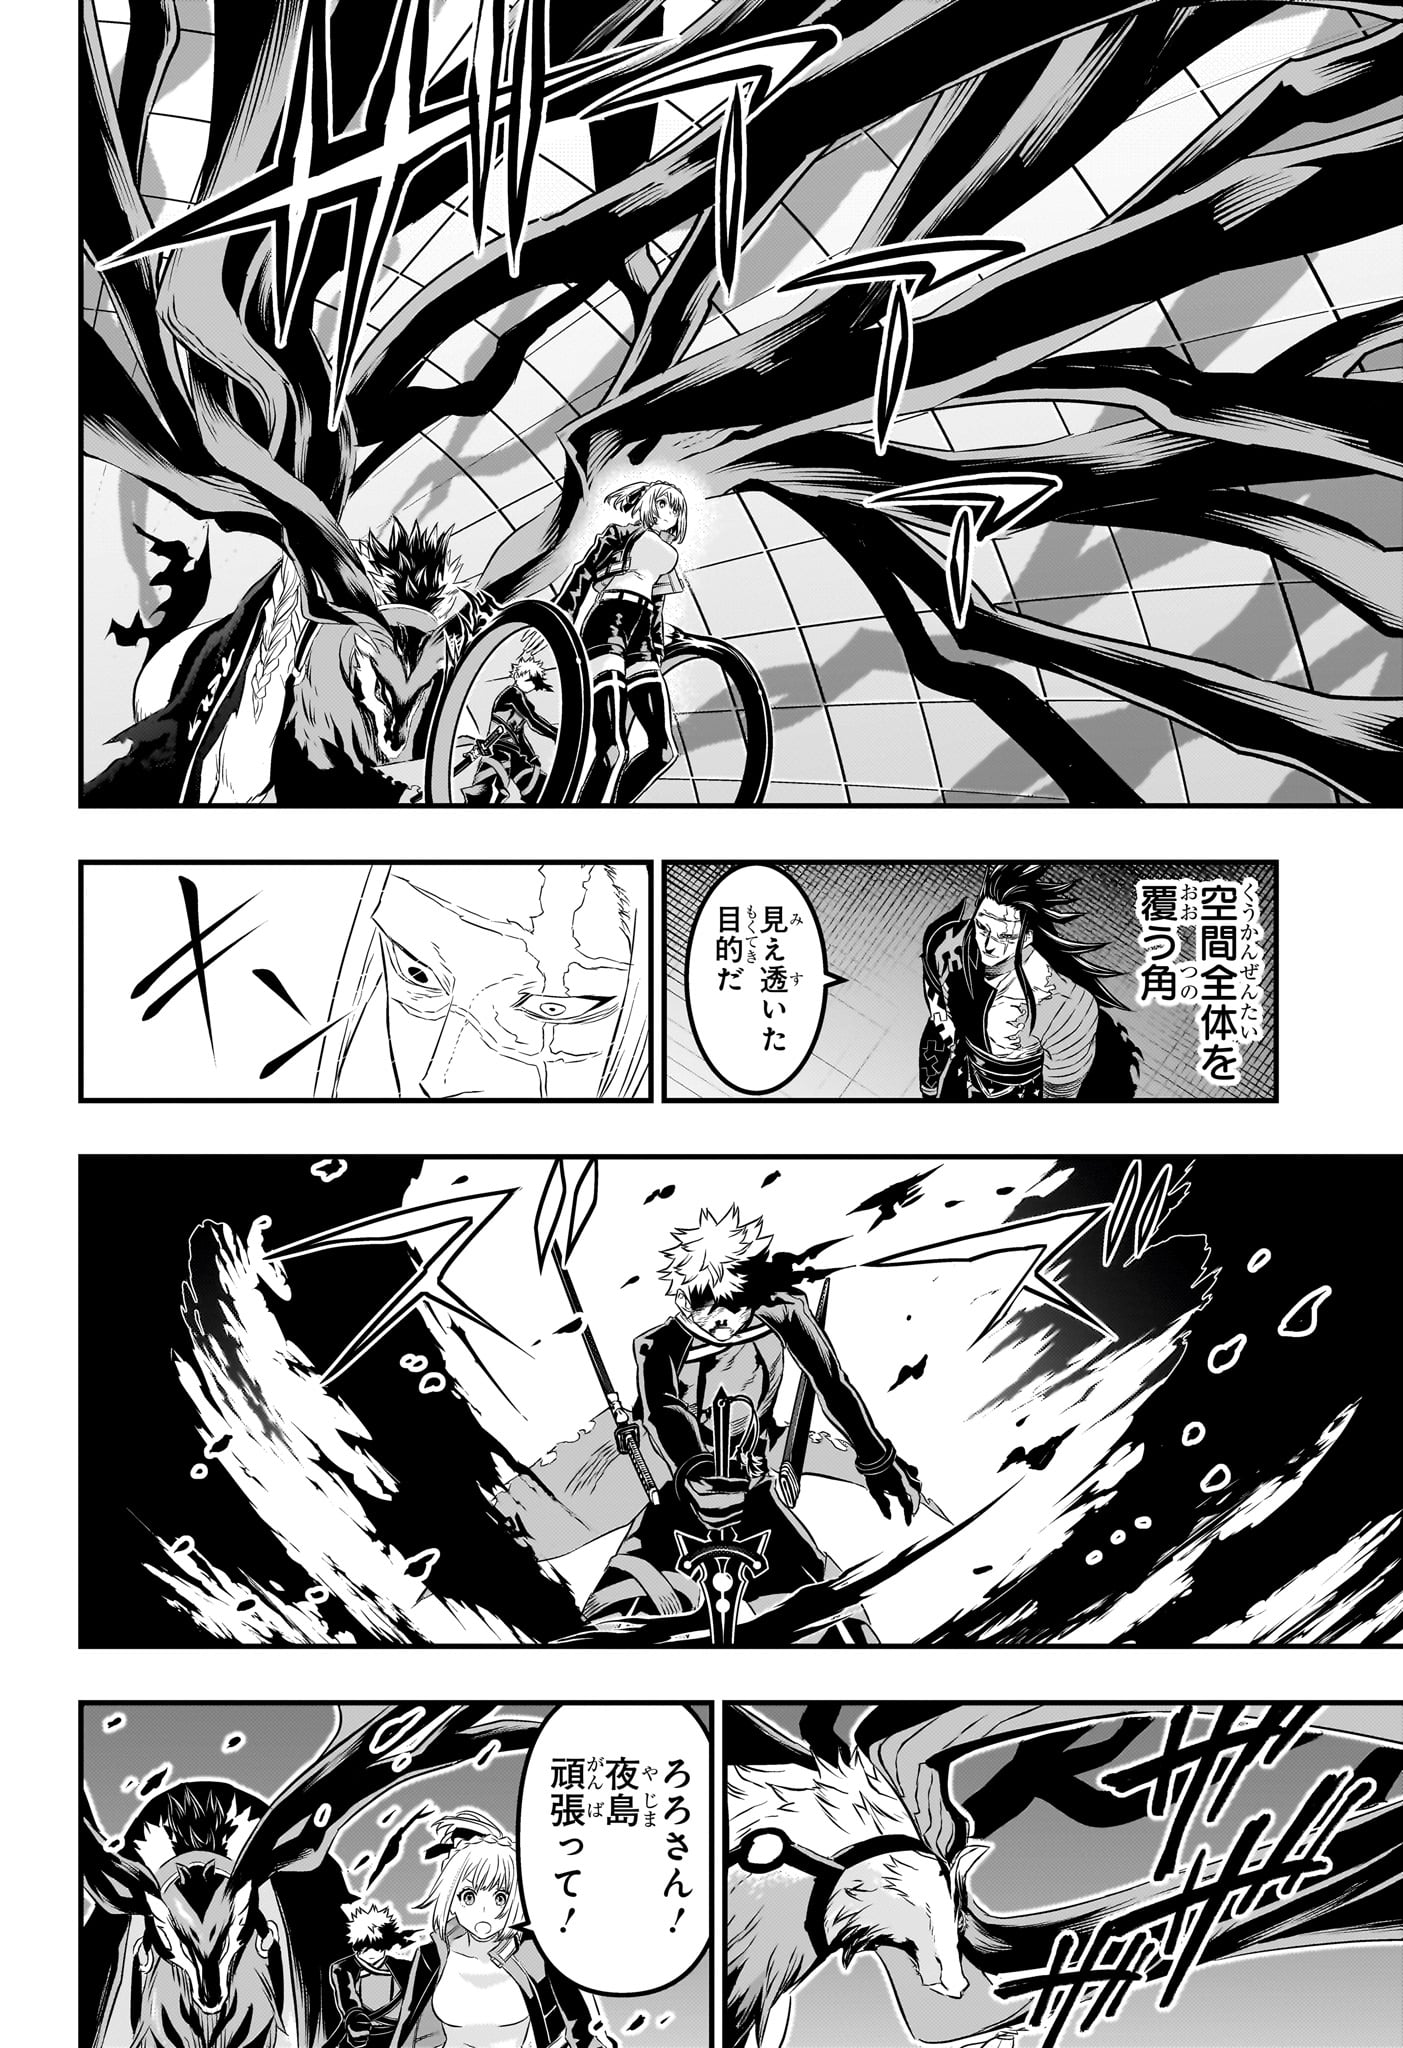 Nue no Onmyouji - Chapter 56 - Page 12